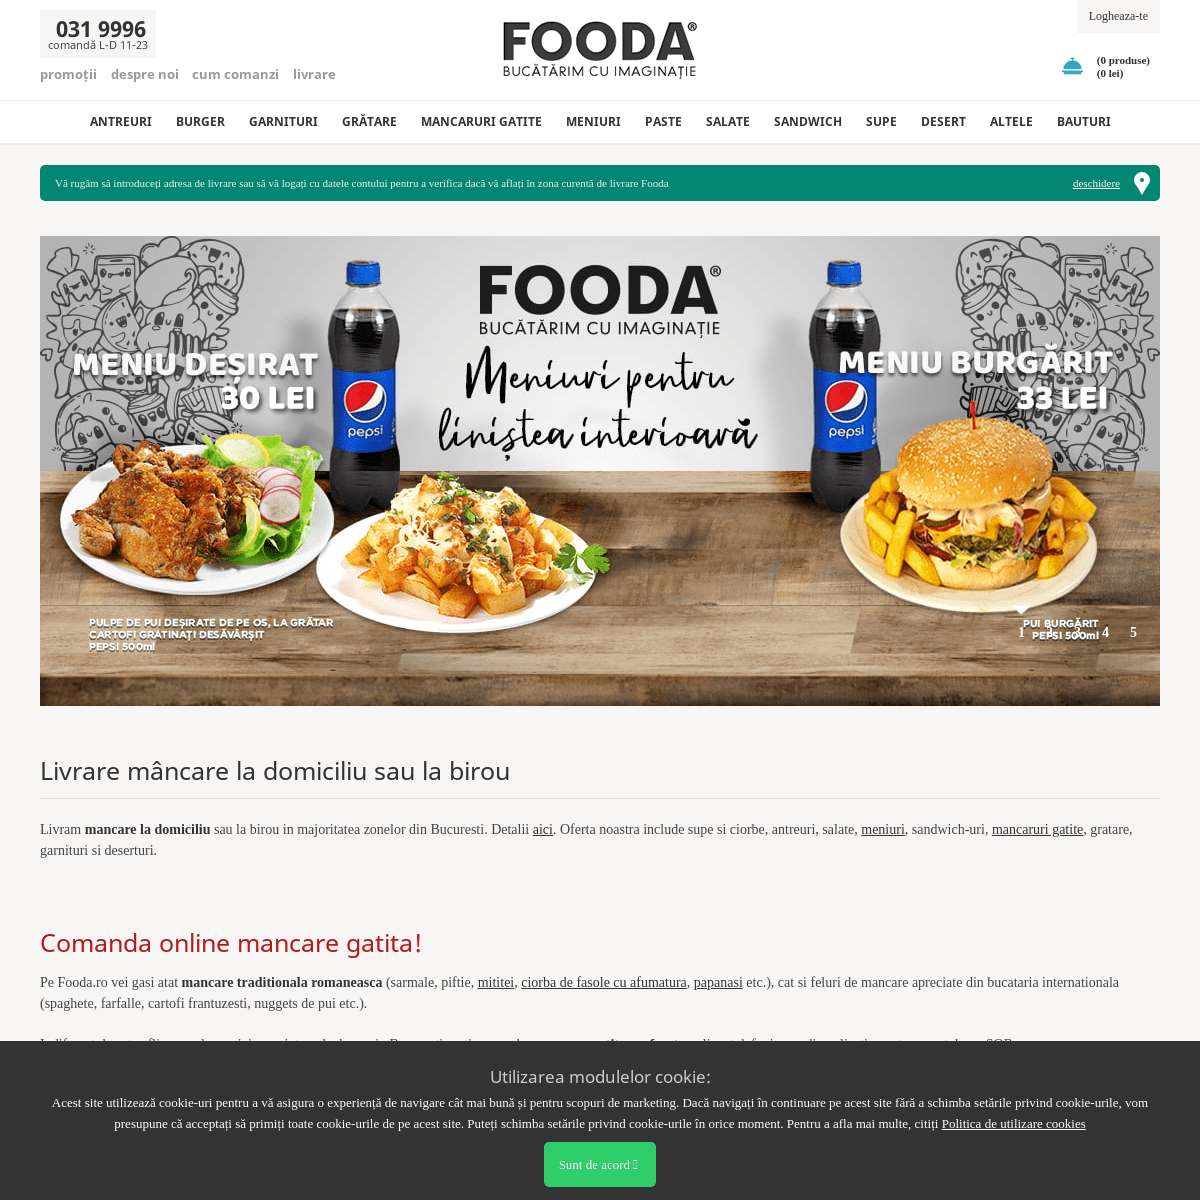 A complete backup of fooda.ro